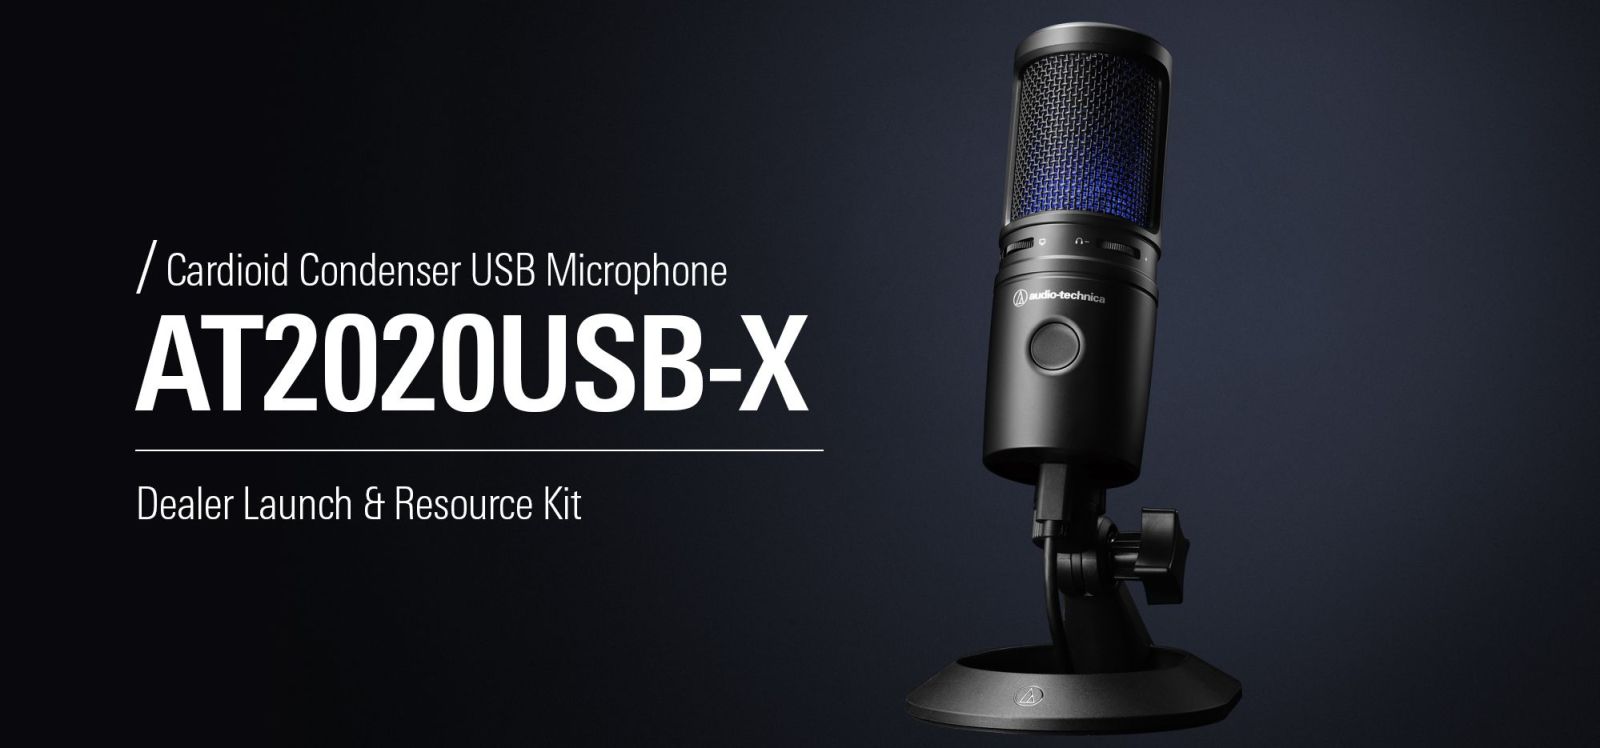 Audio-Technica release AT2020USB-XP microphone